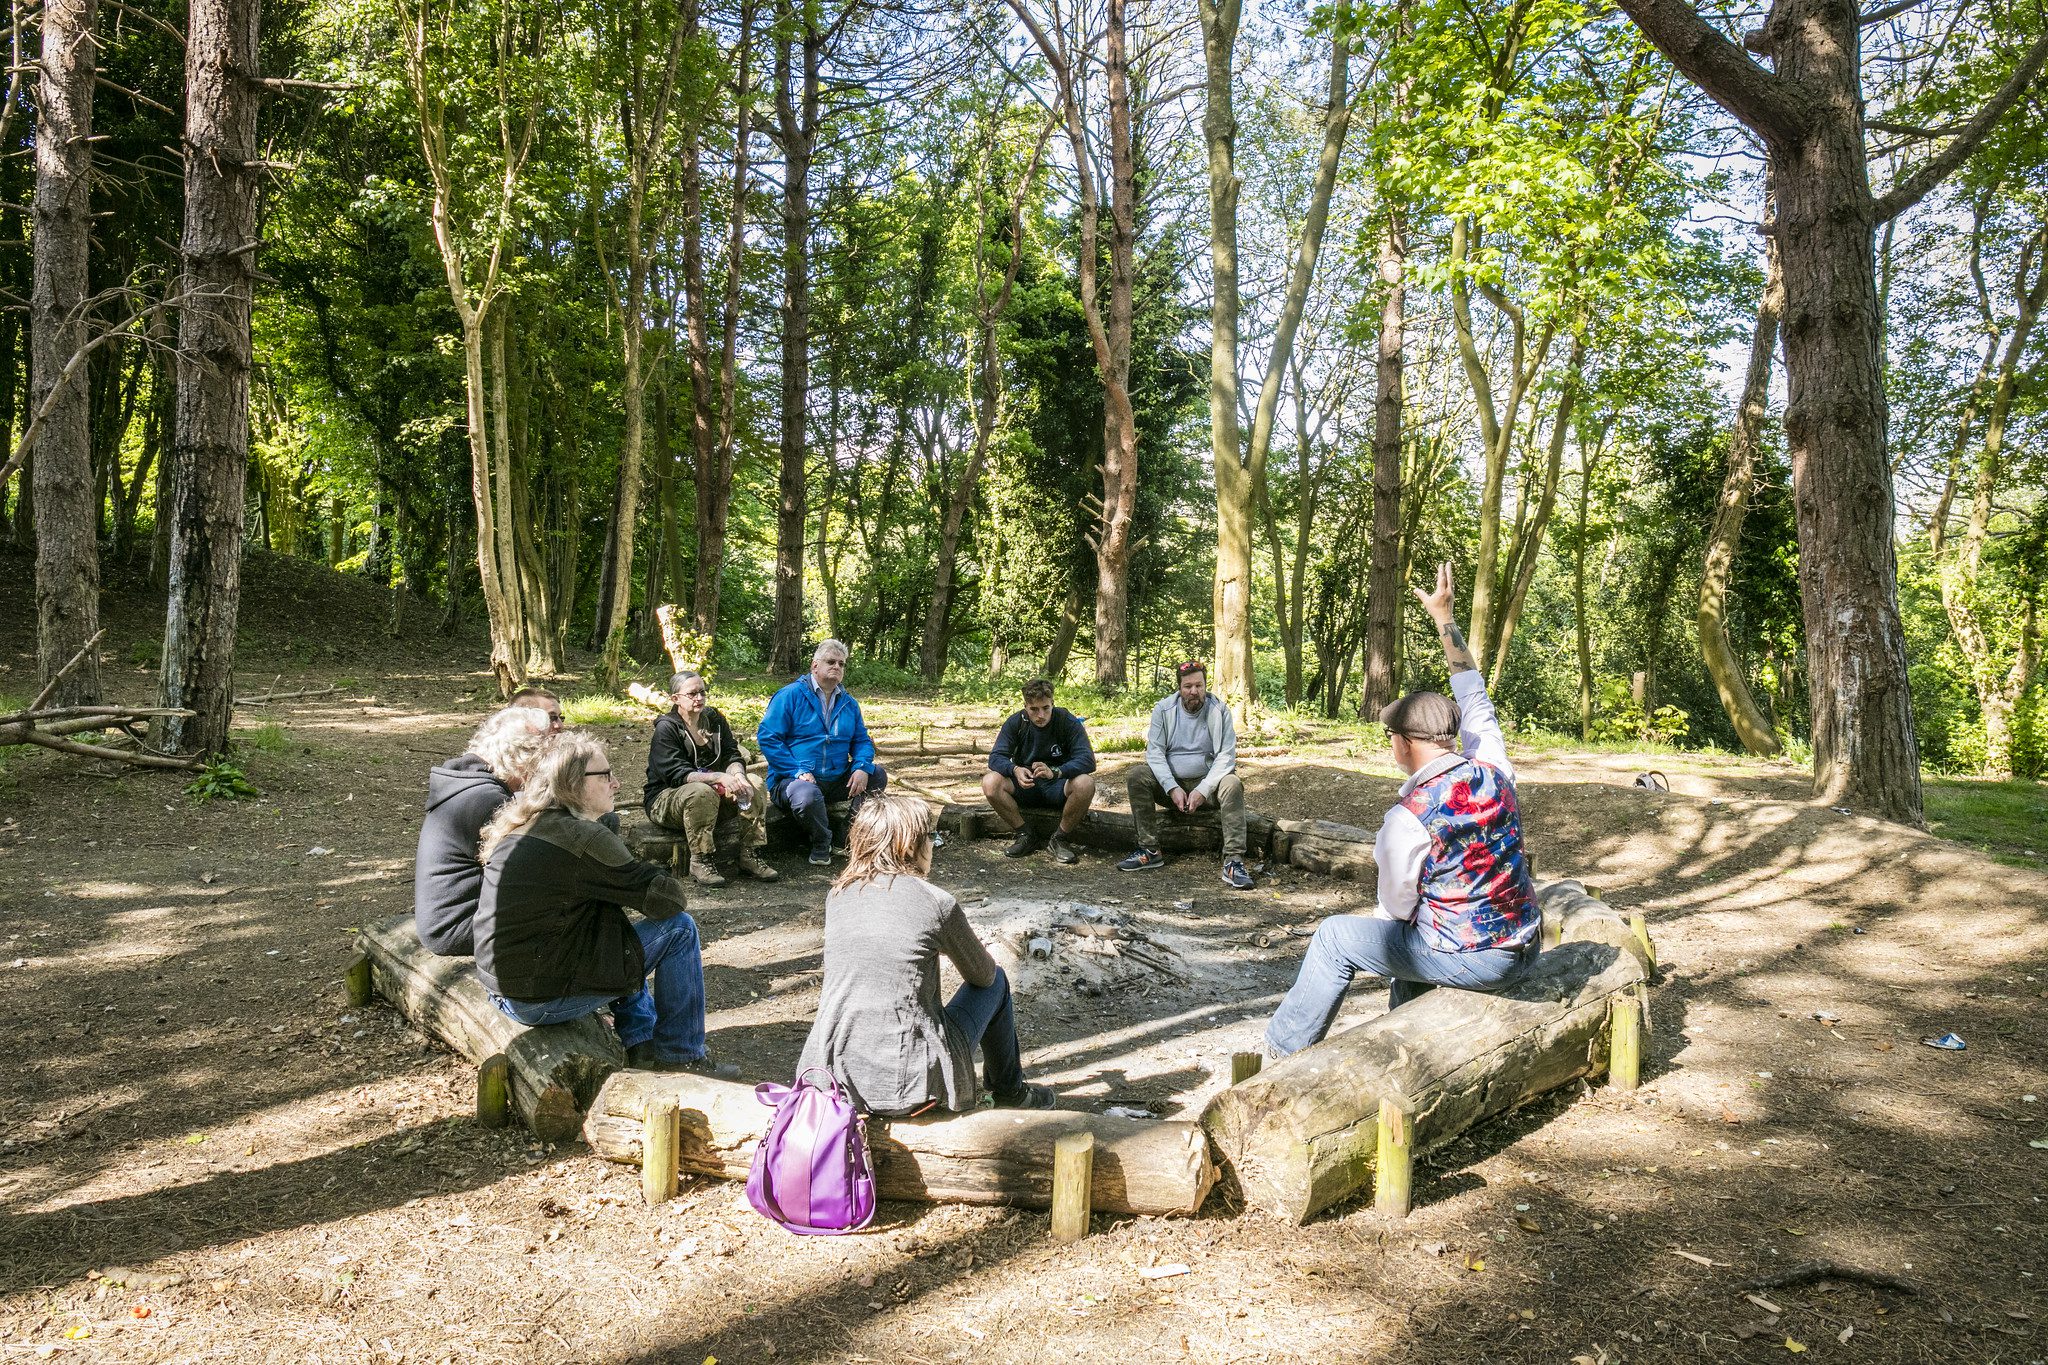 Group of people sitting in a circle in a woodland clearing. On a sunny day, one person has their hand raised.